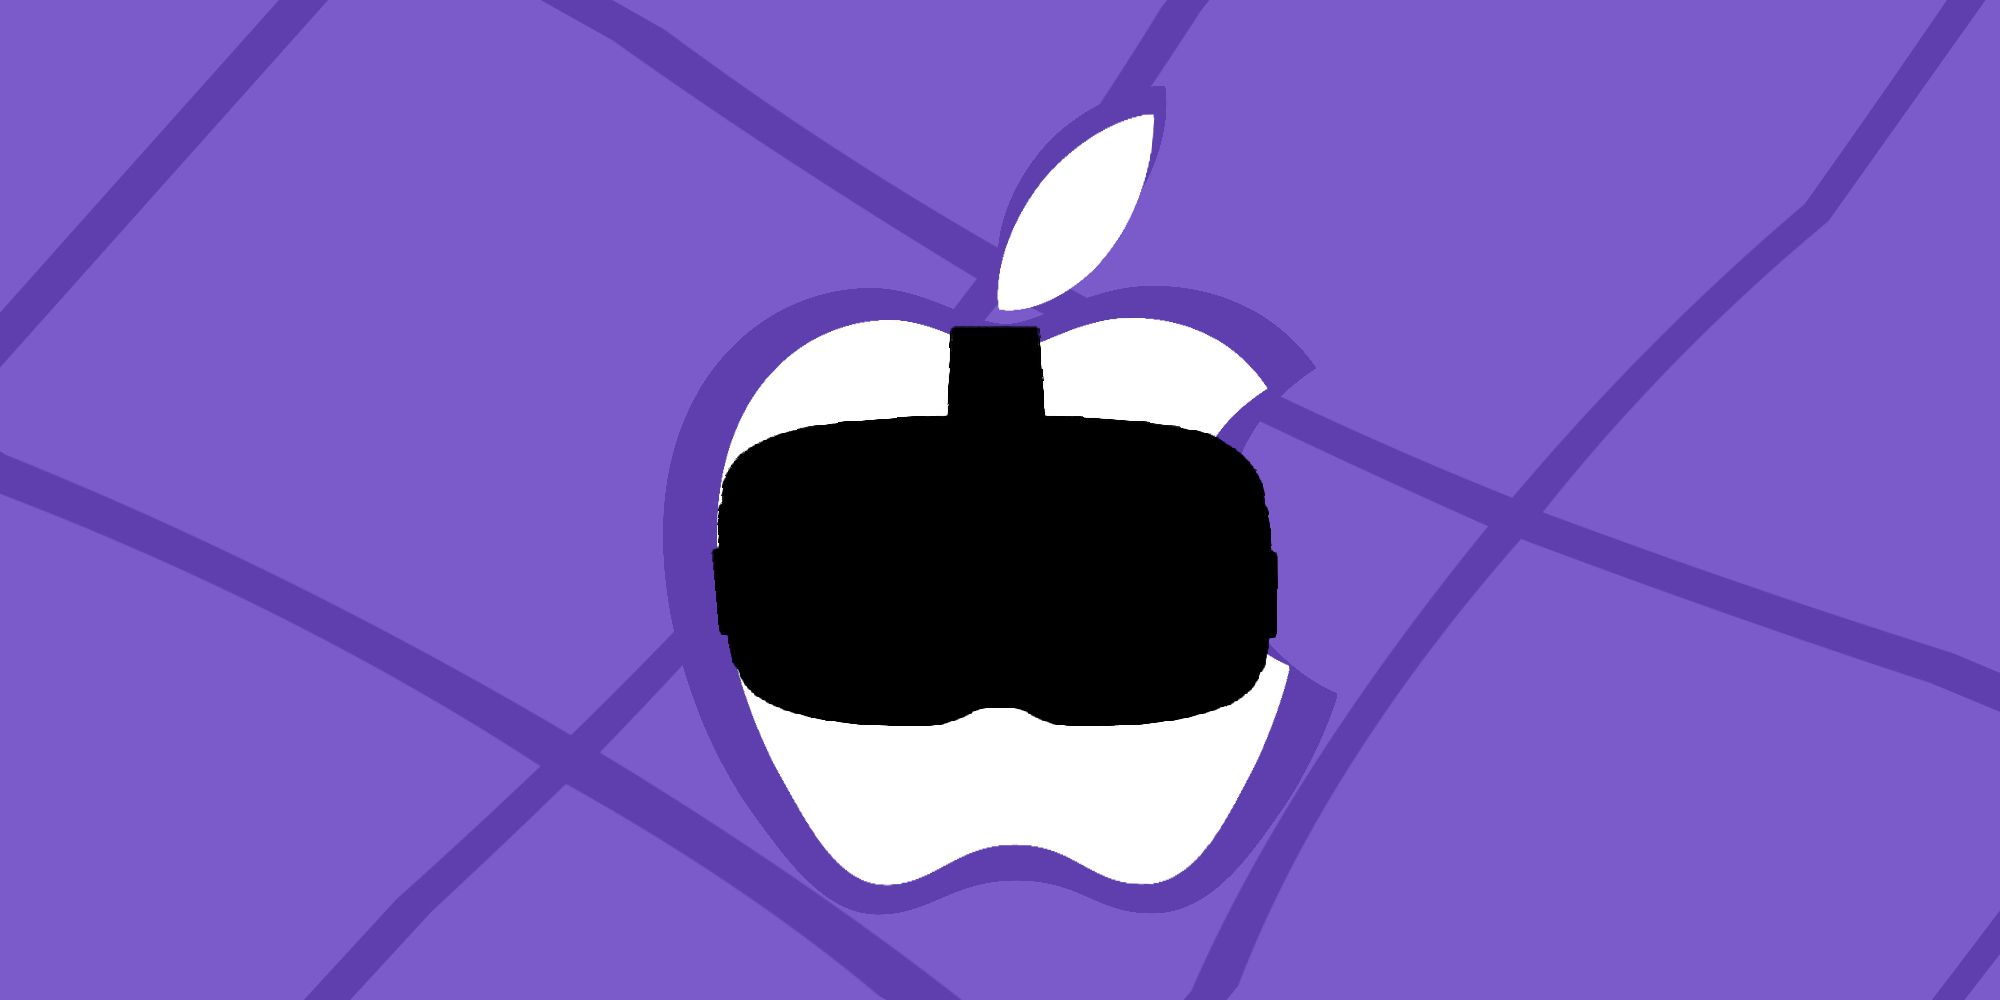 Apple Logo with VR headset on it 